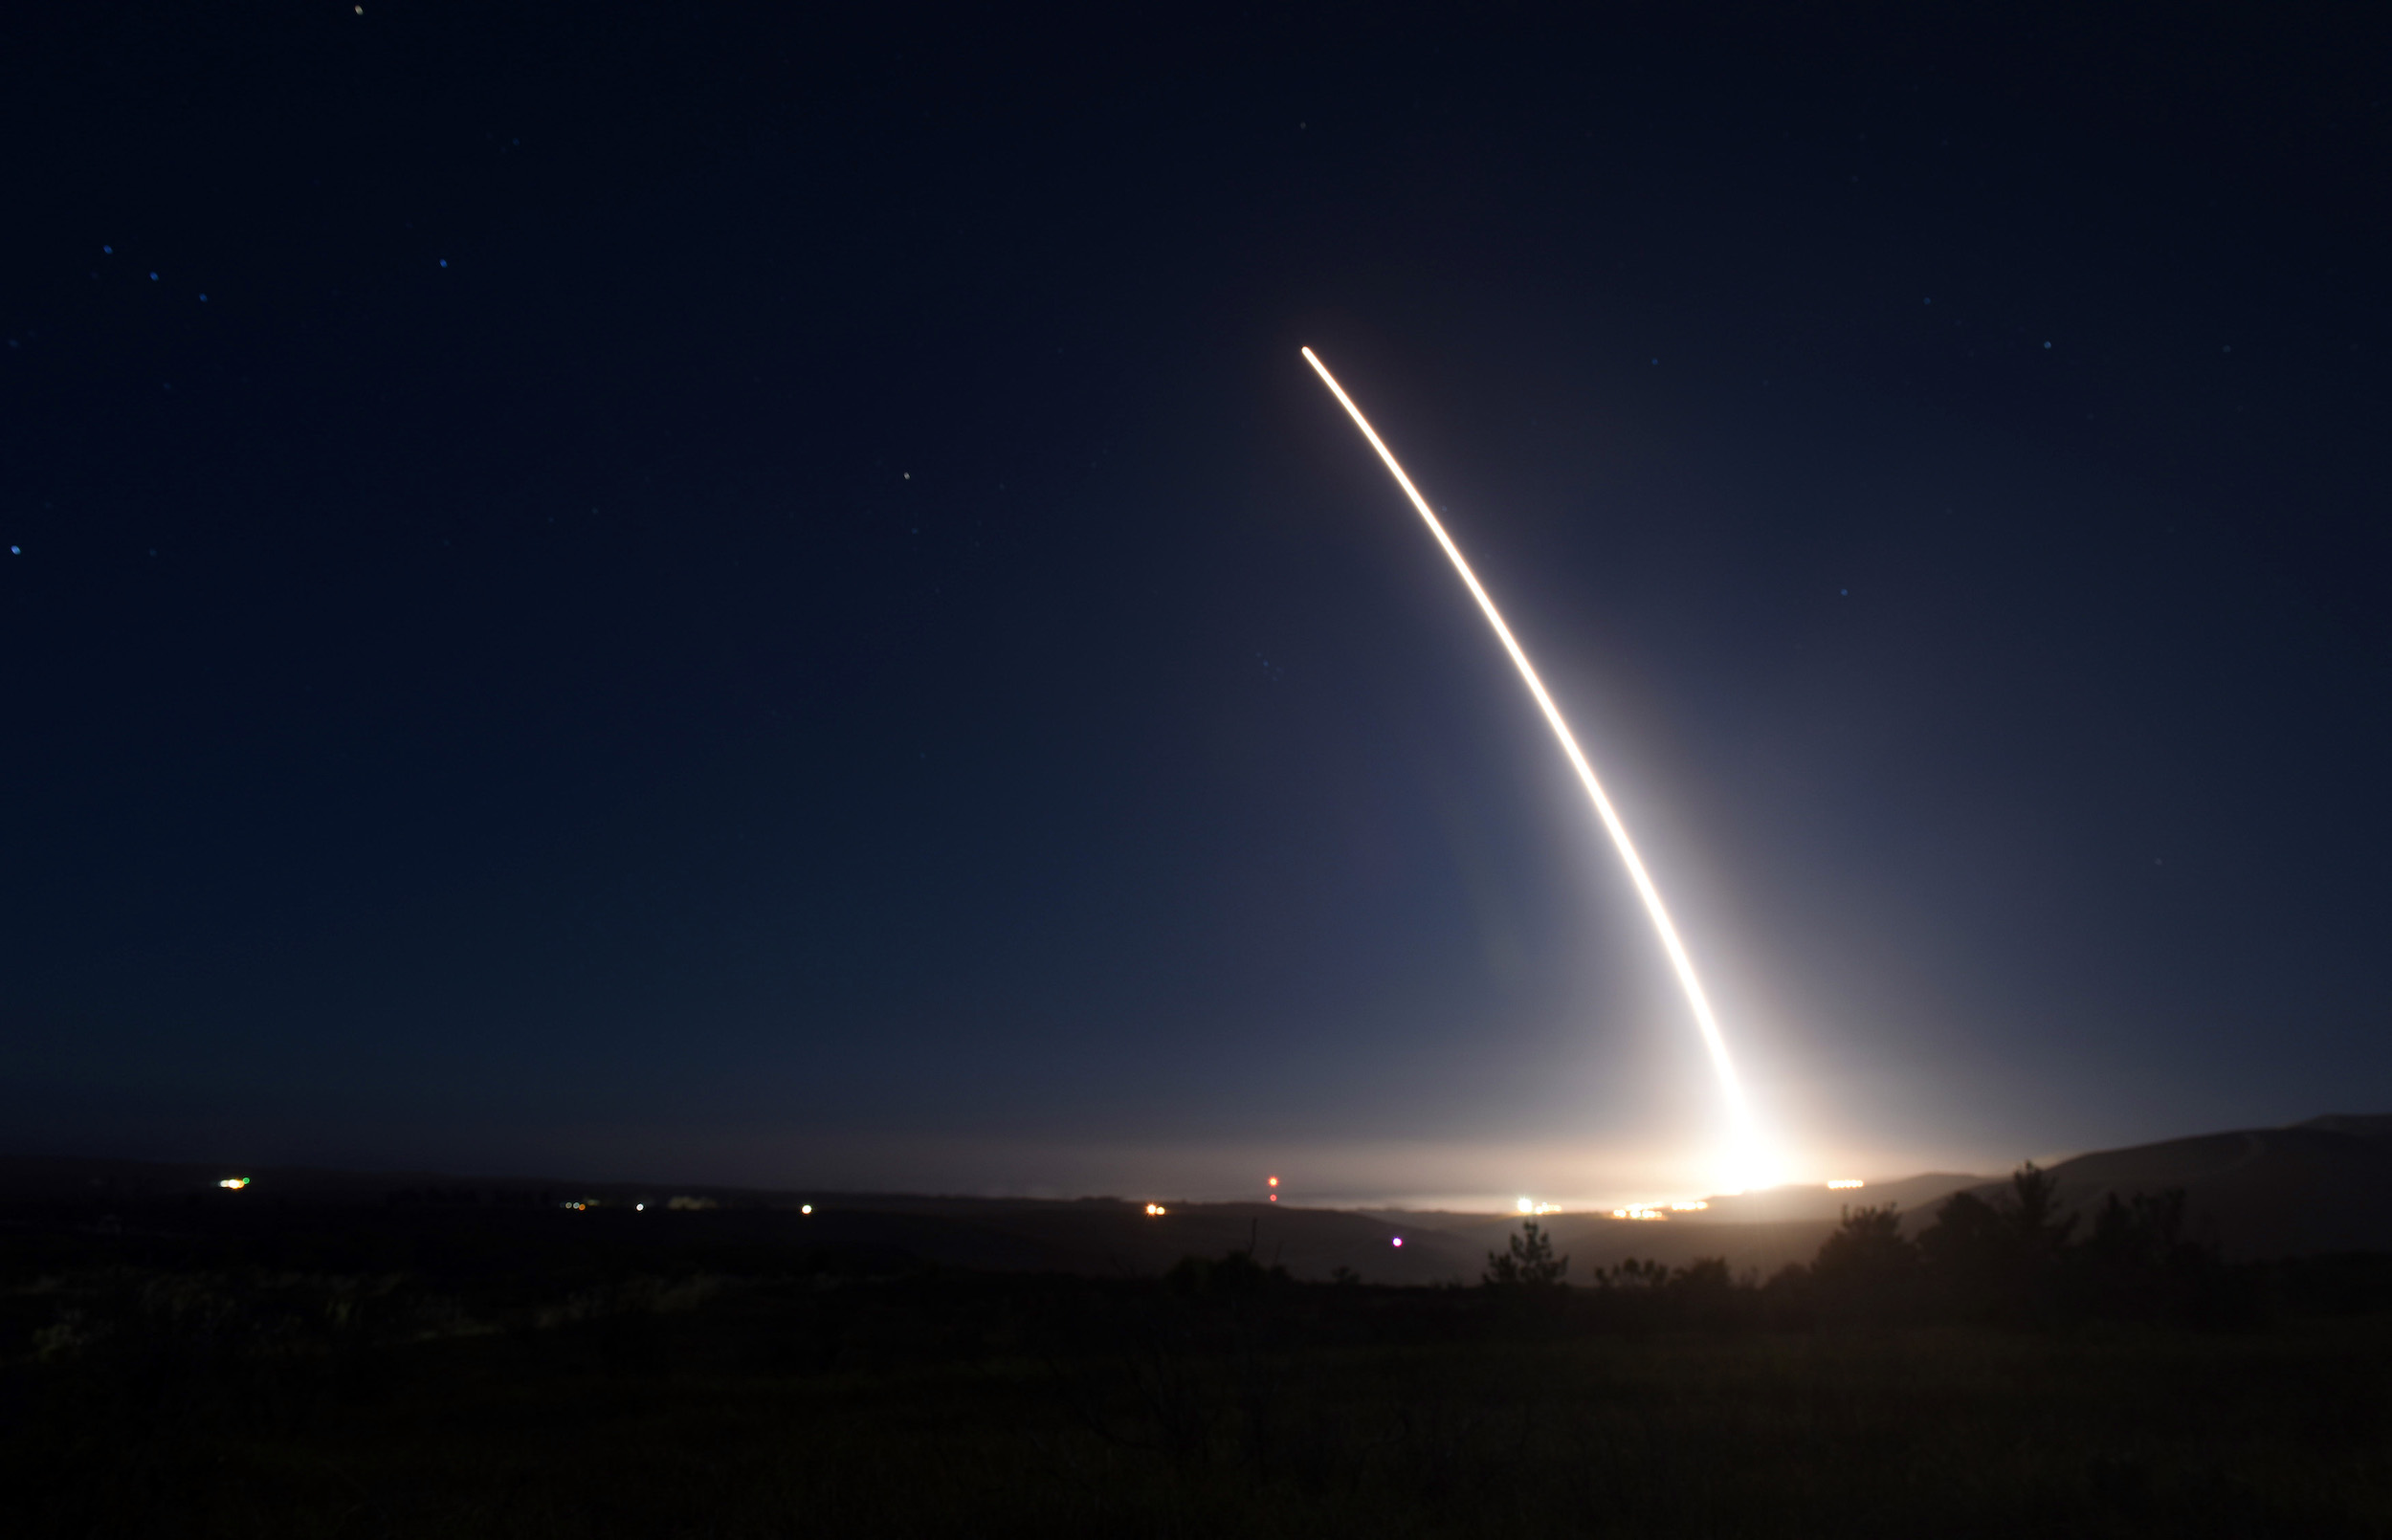 A New START for New START? The Future Russo-American Nuclear Arms Control